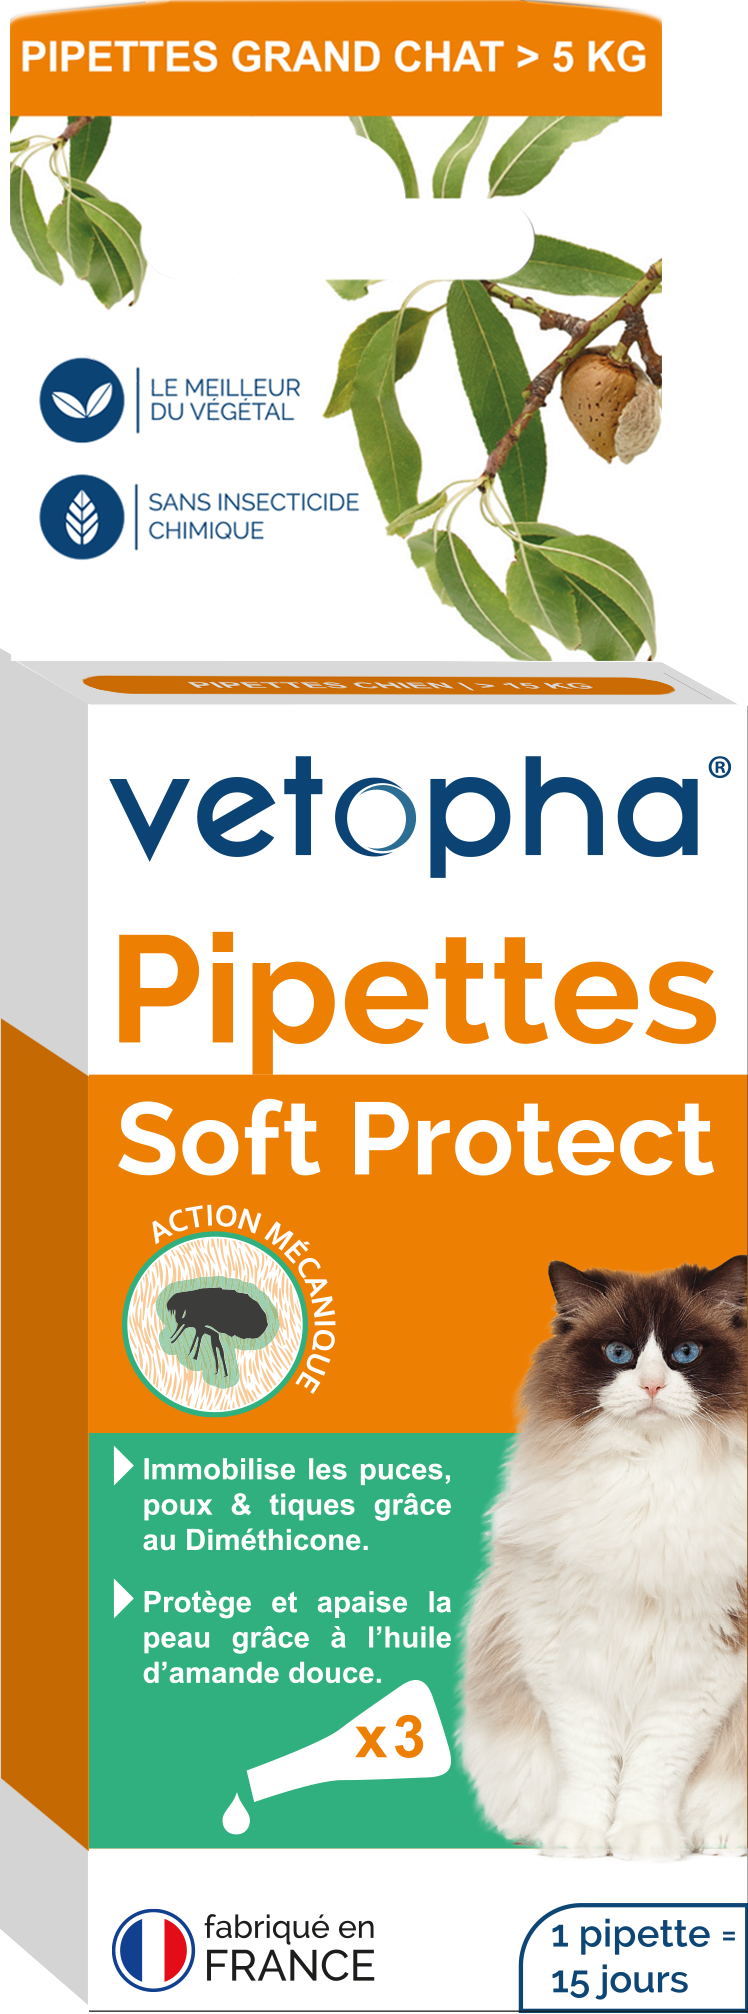 VETOPHA pipettes soft protect grand chat